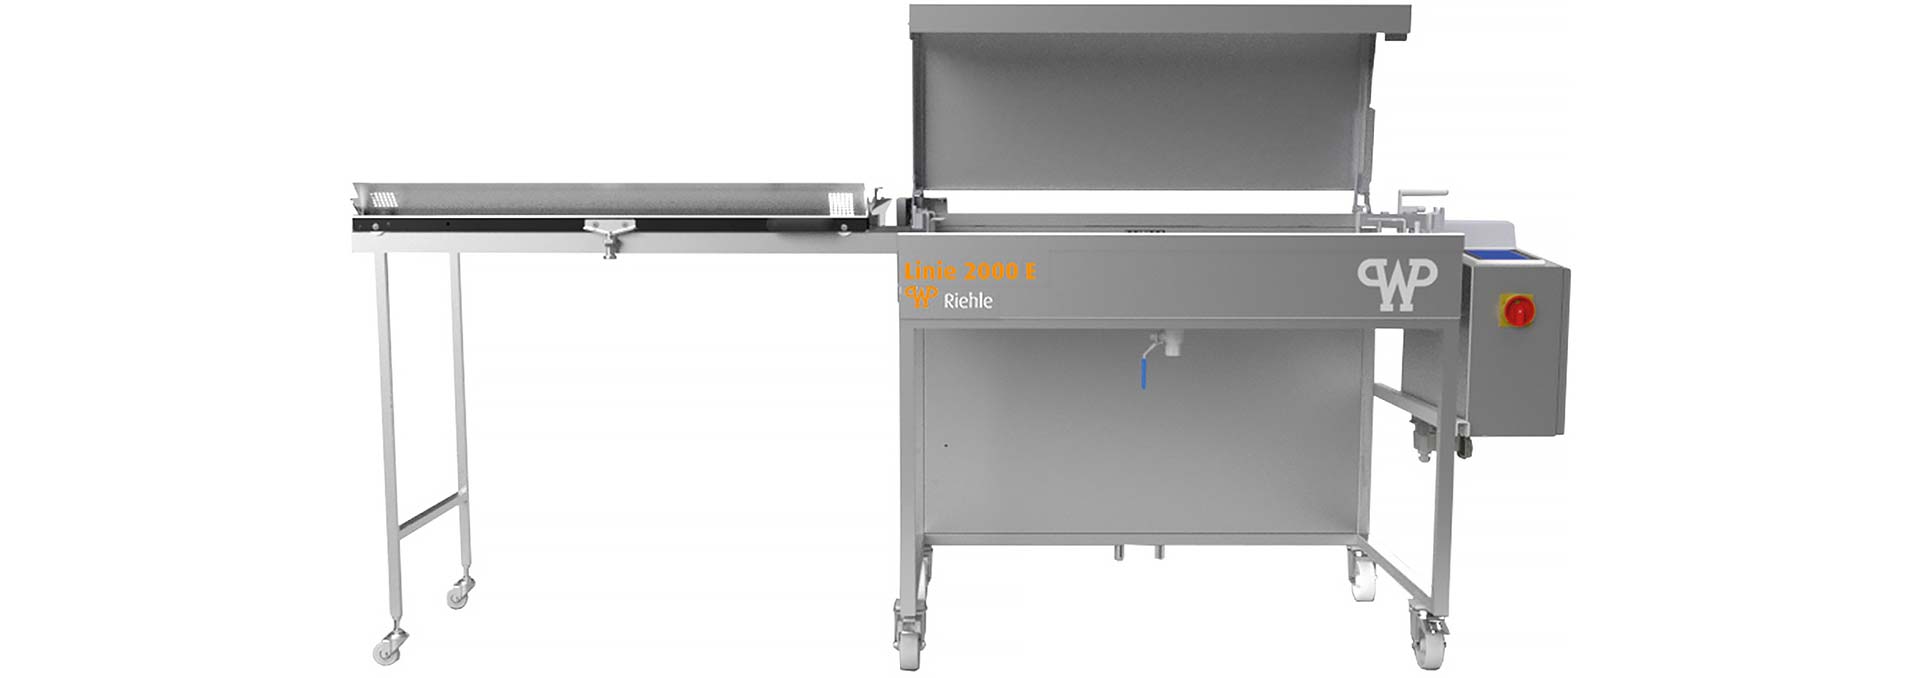 Our WP Riehle L2000 E Deep Fryer our flexible automatic deep fryer with energy savings, too. Commercial and Industrial Bakery Equipment available through WP Bakery Group USA in Shelton, CT